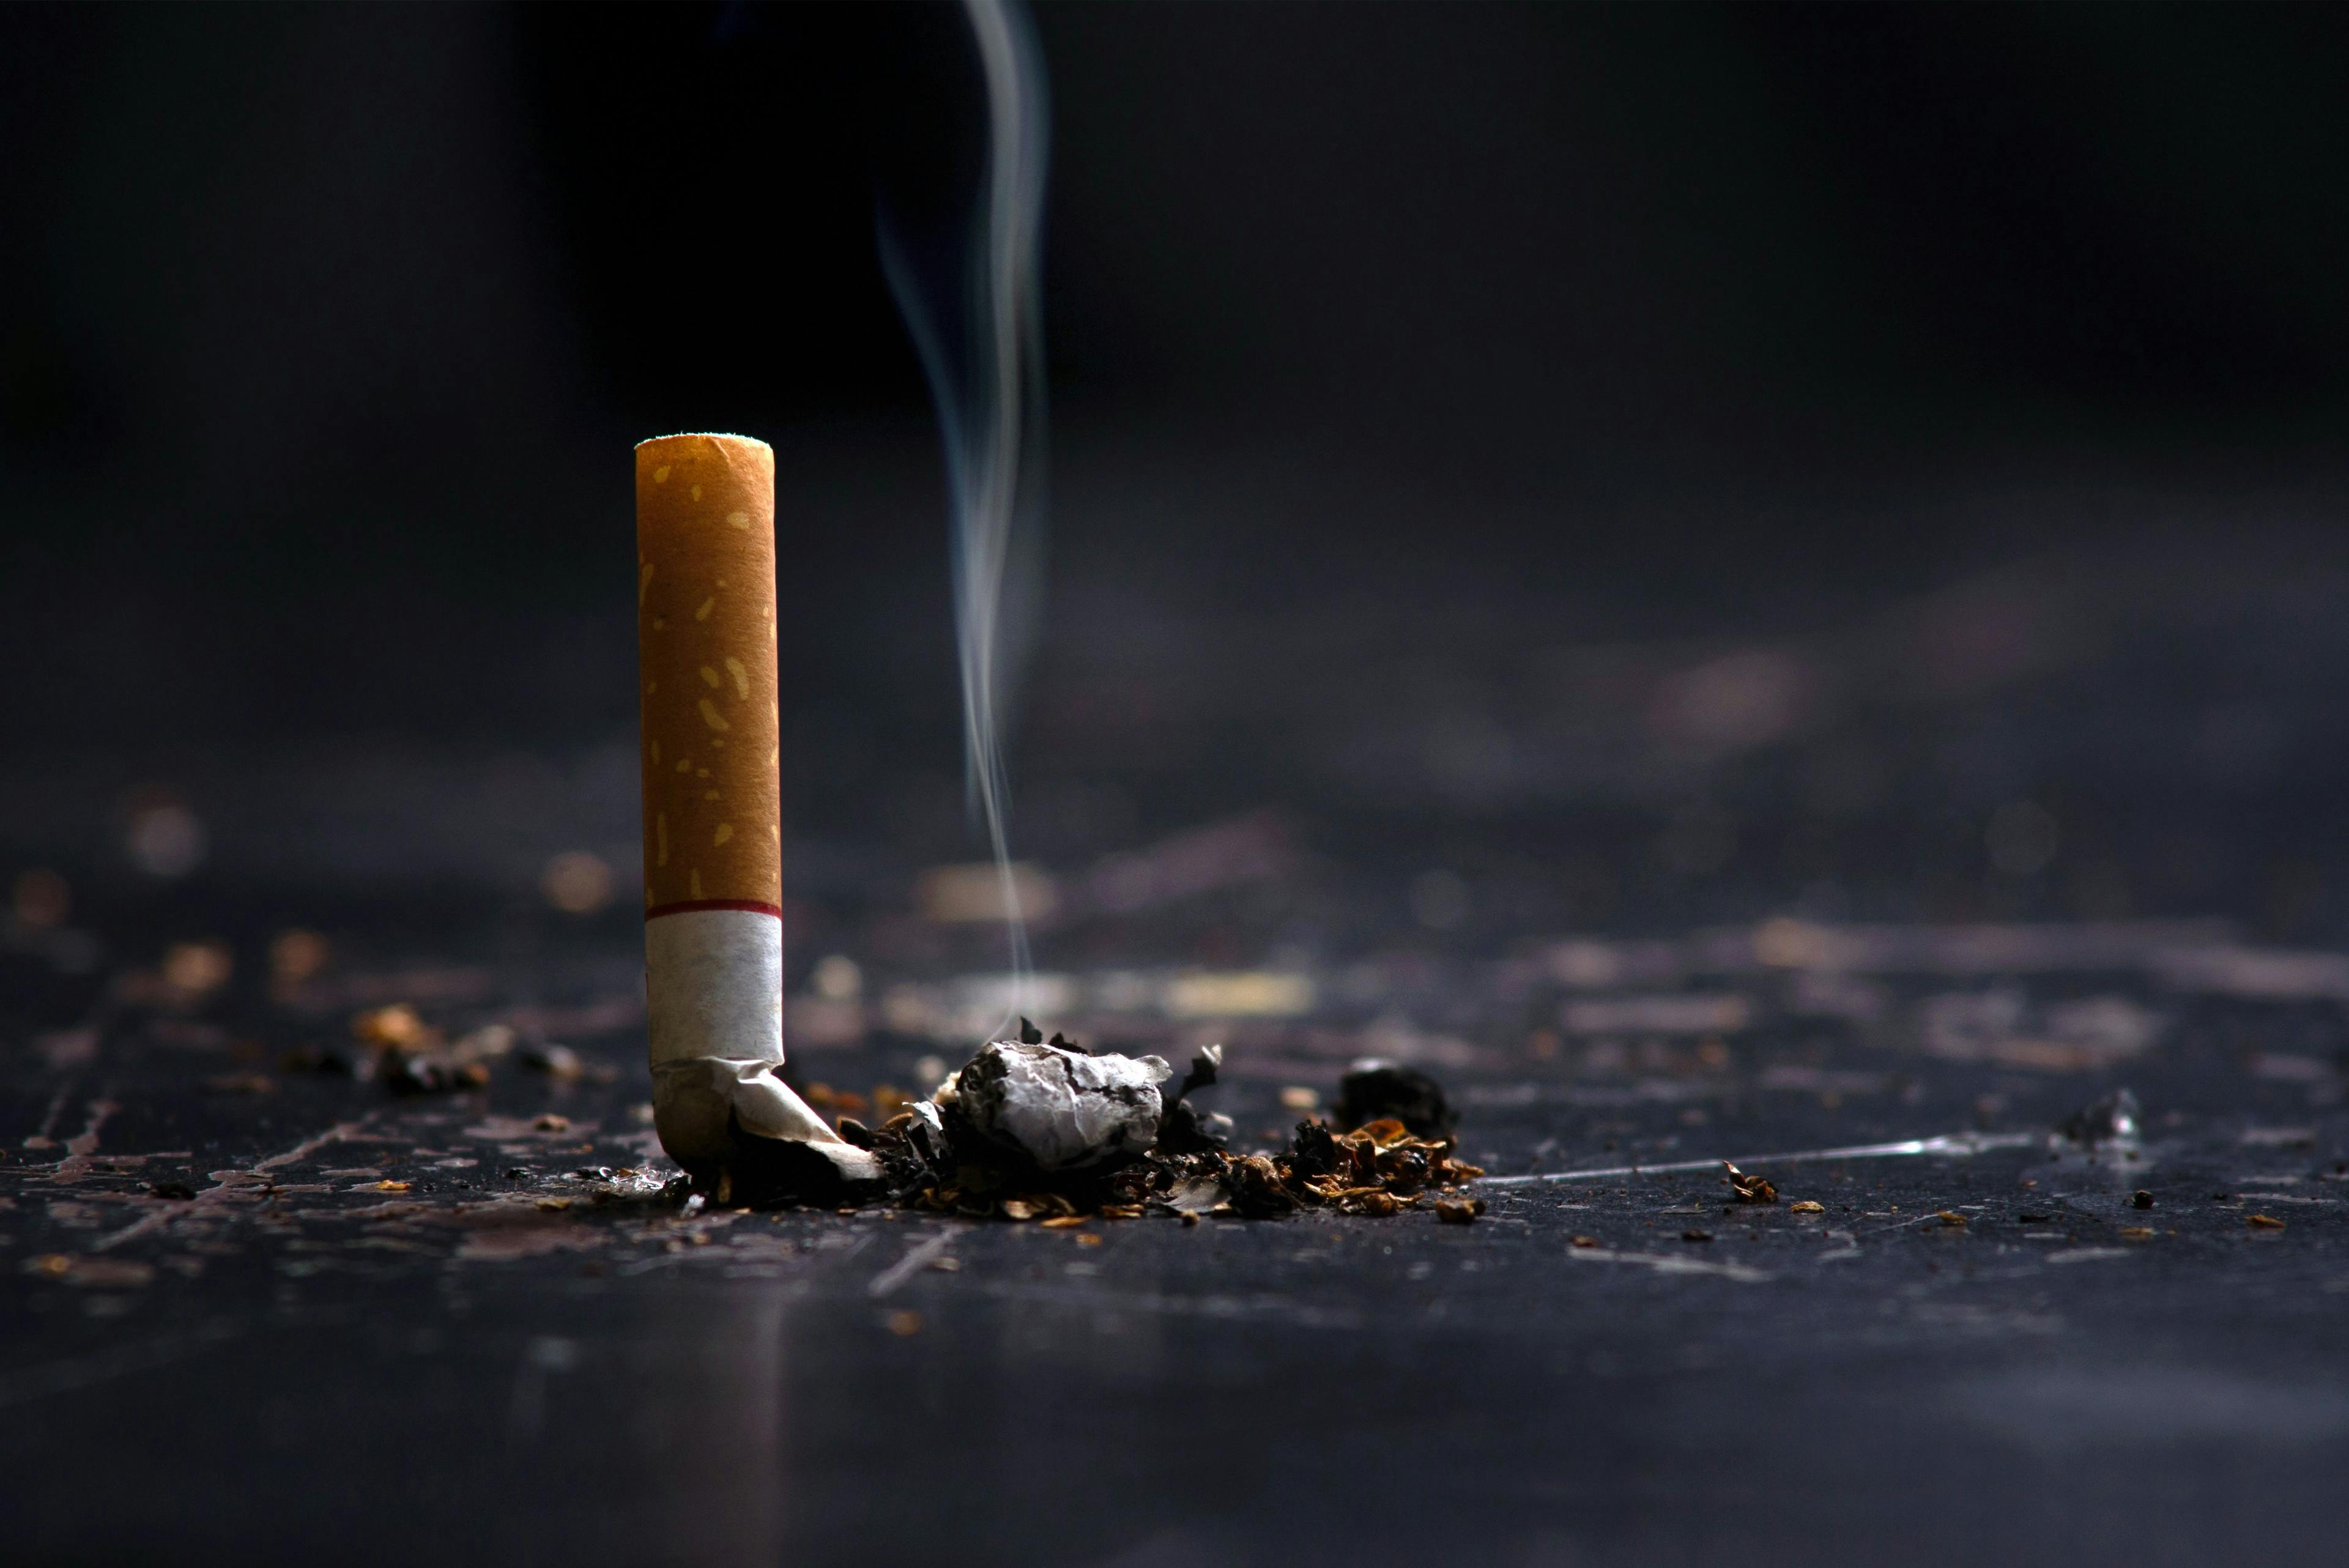 World No Tobacco Day Concept Stop Smoking.tobacco cigarette butt on the floor | Image credit: Pcess609 - stock.adobe.com